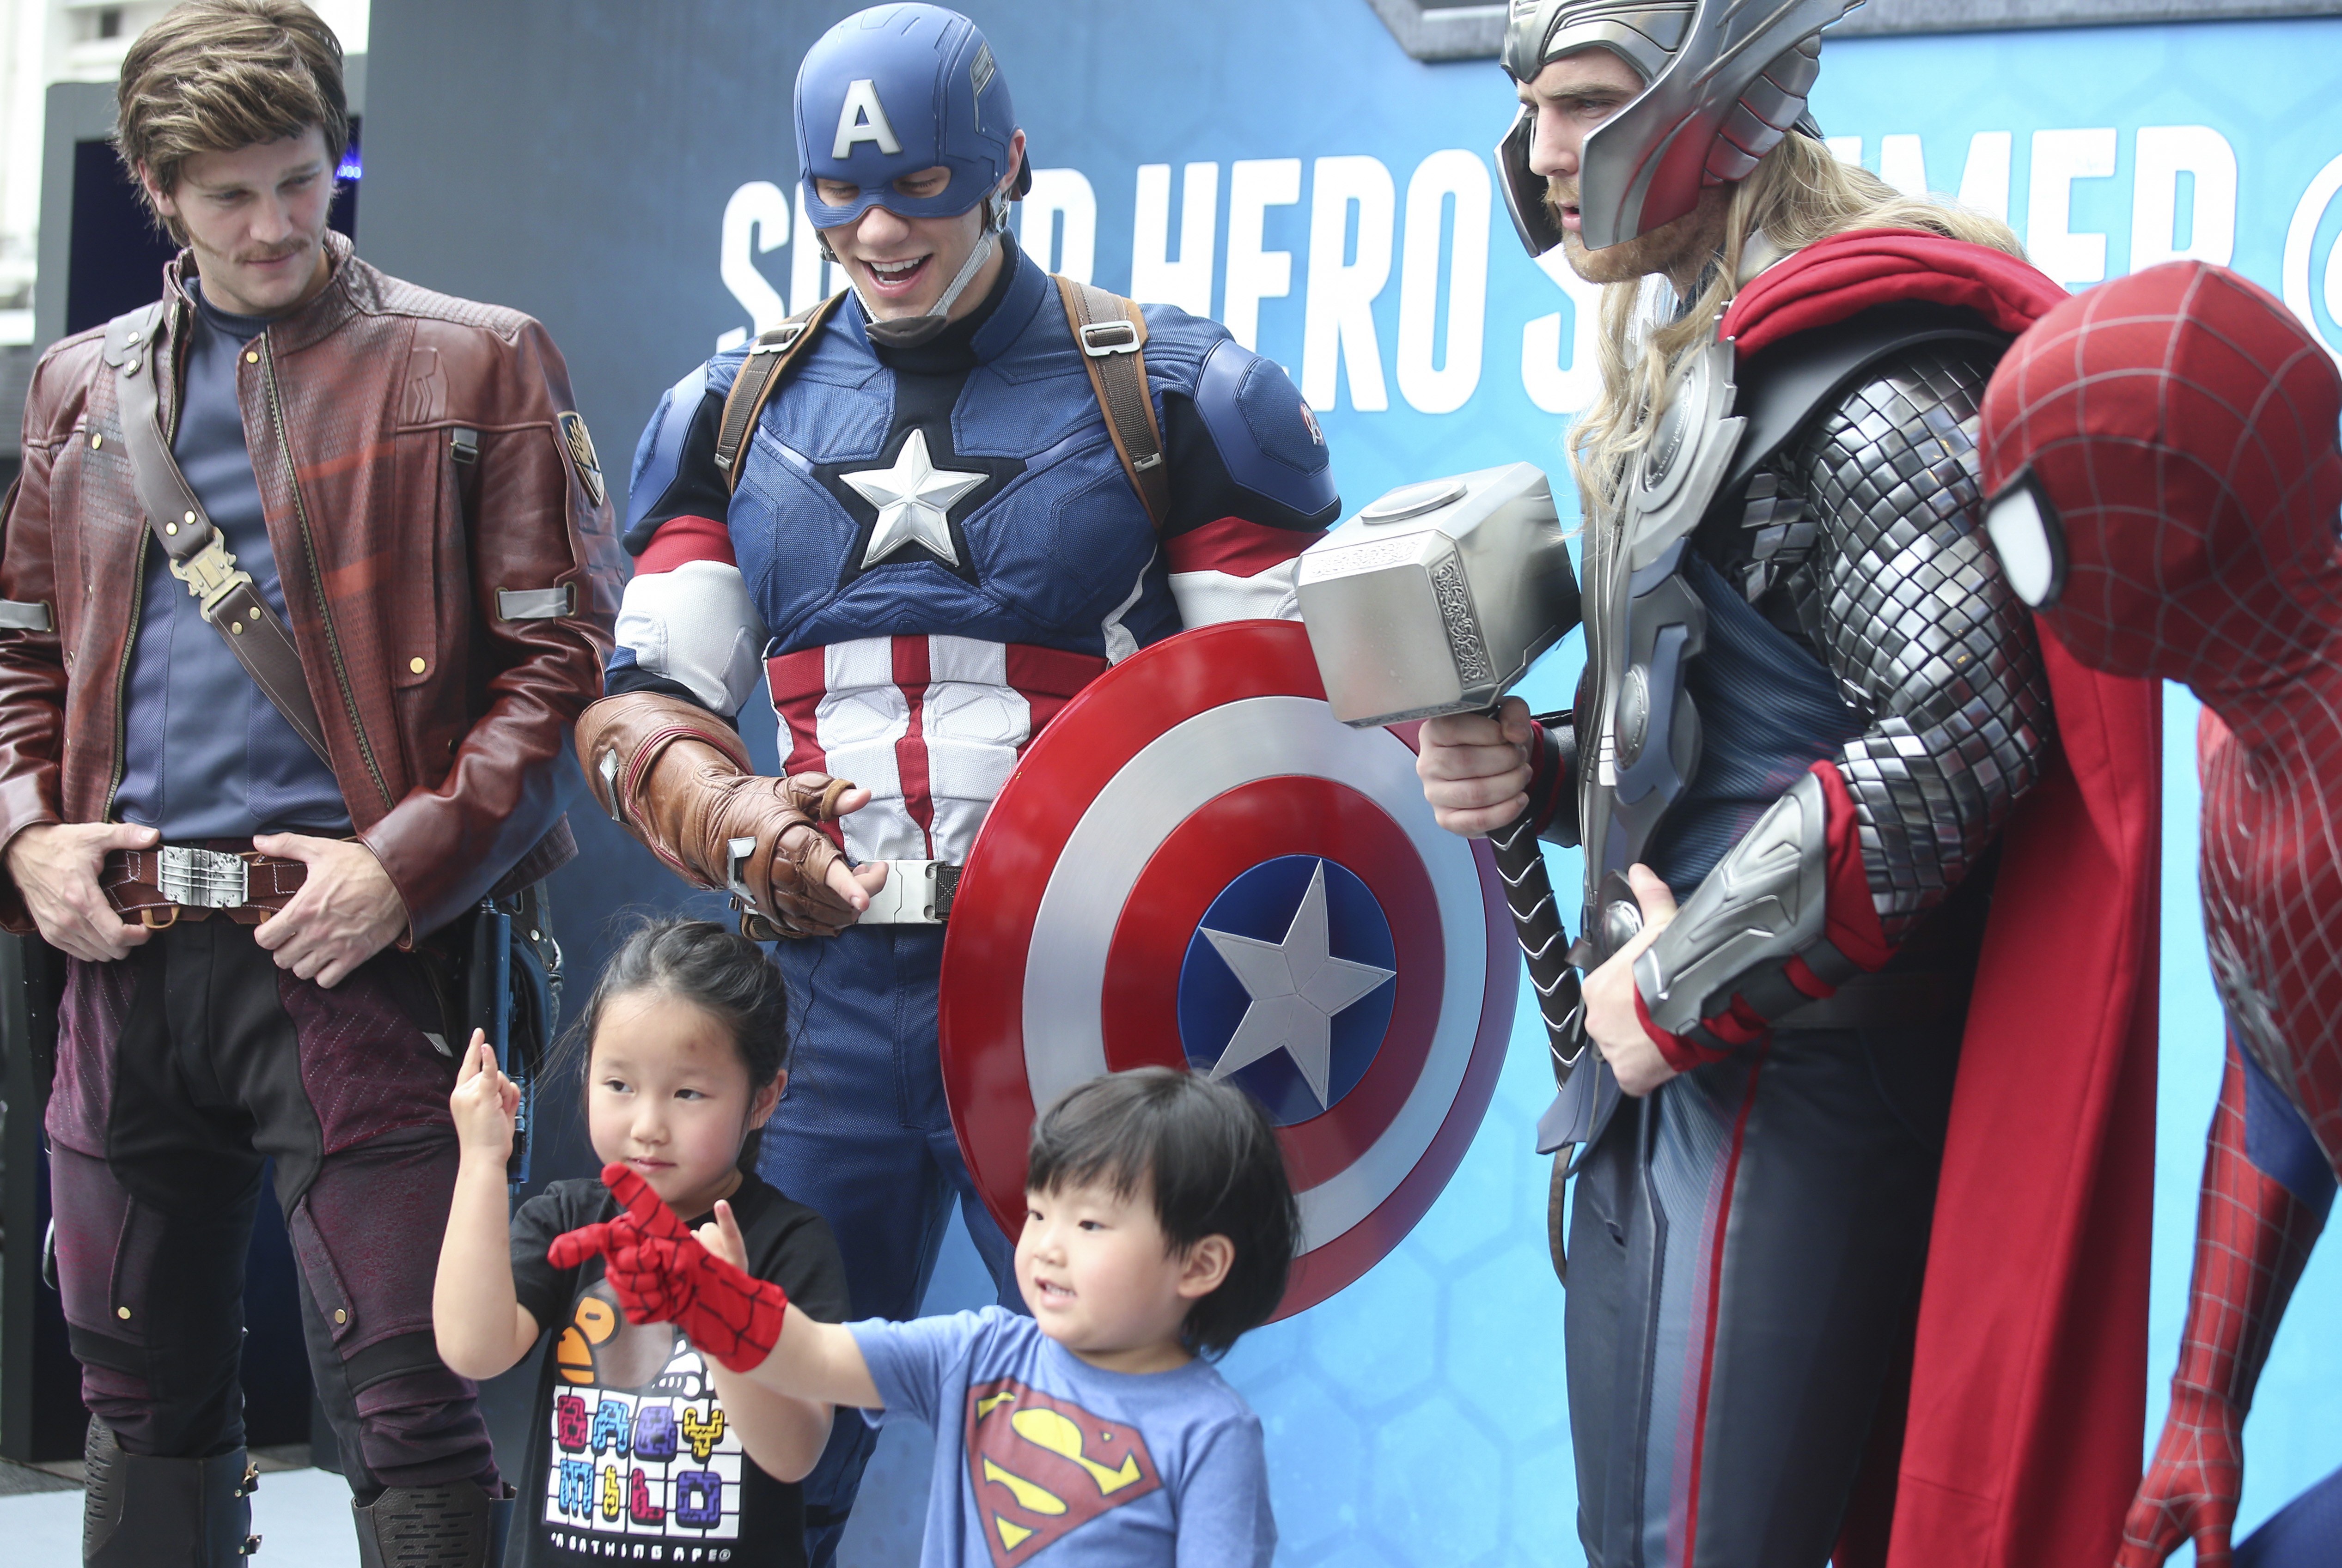 Harbour City’s display of Disney superheroes is aimed at attracting more shoppers. Photo: K. Y. Cheng